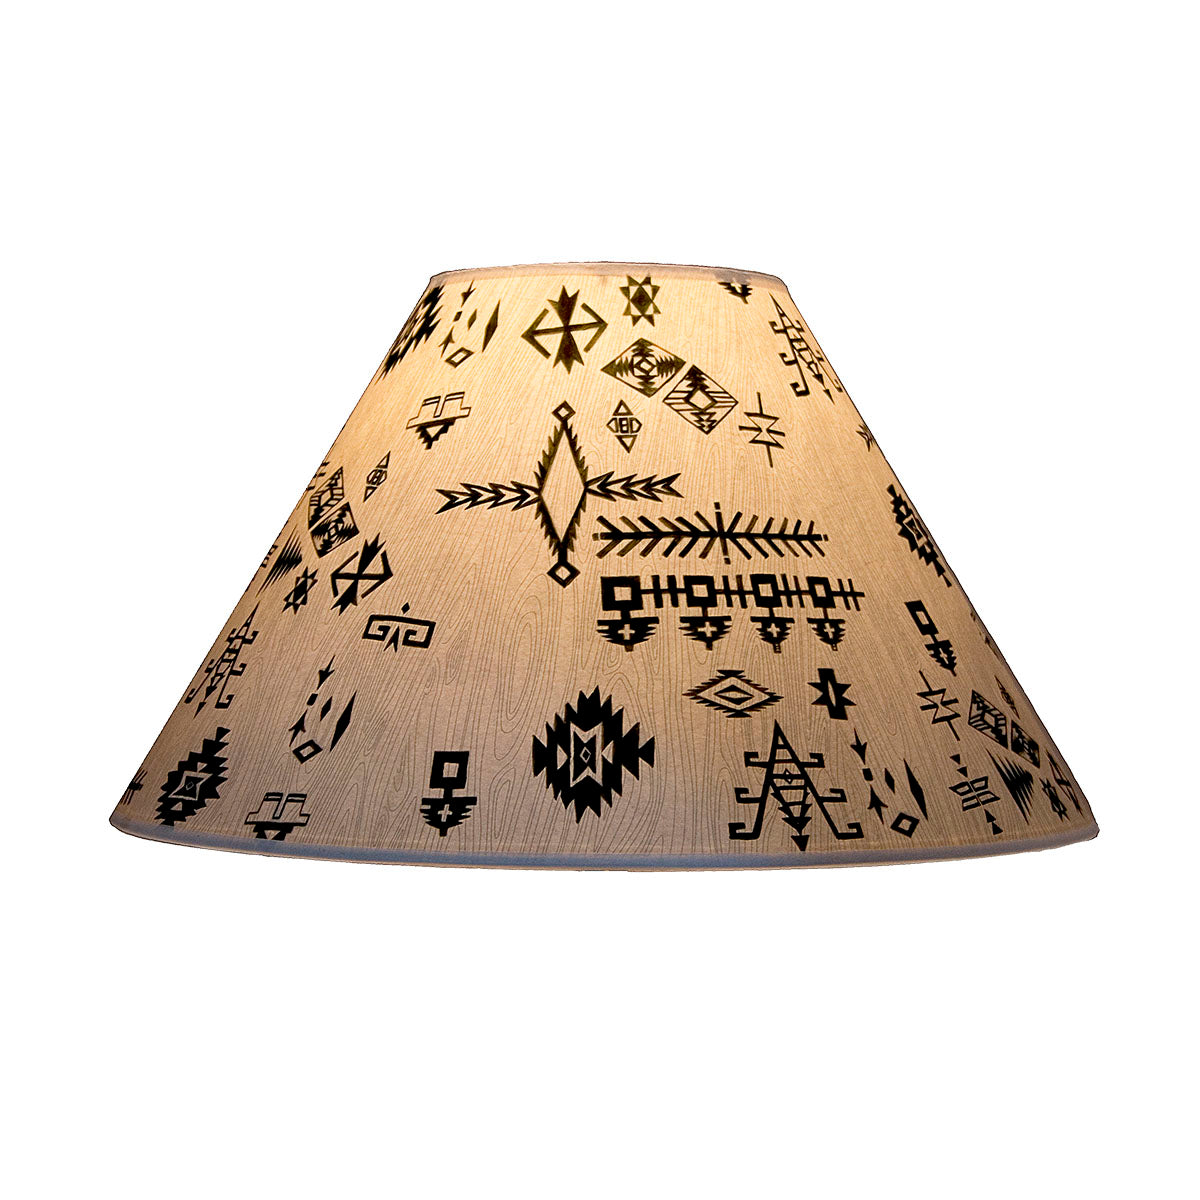 Medium Conical Lamp Shade in Blanket Sketches